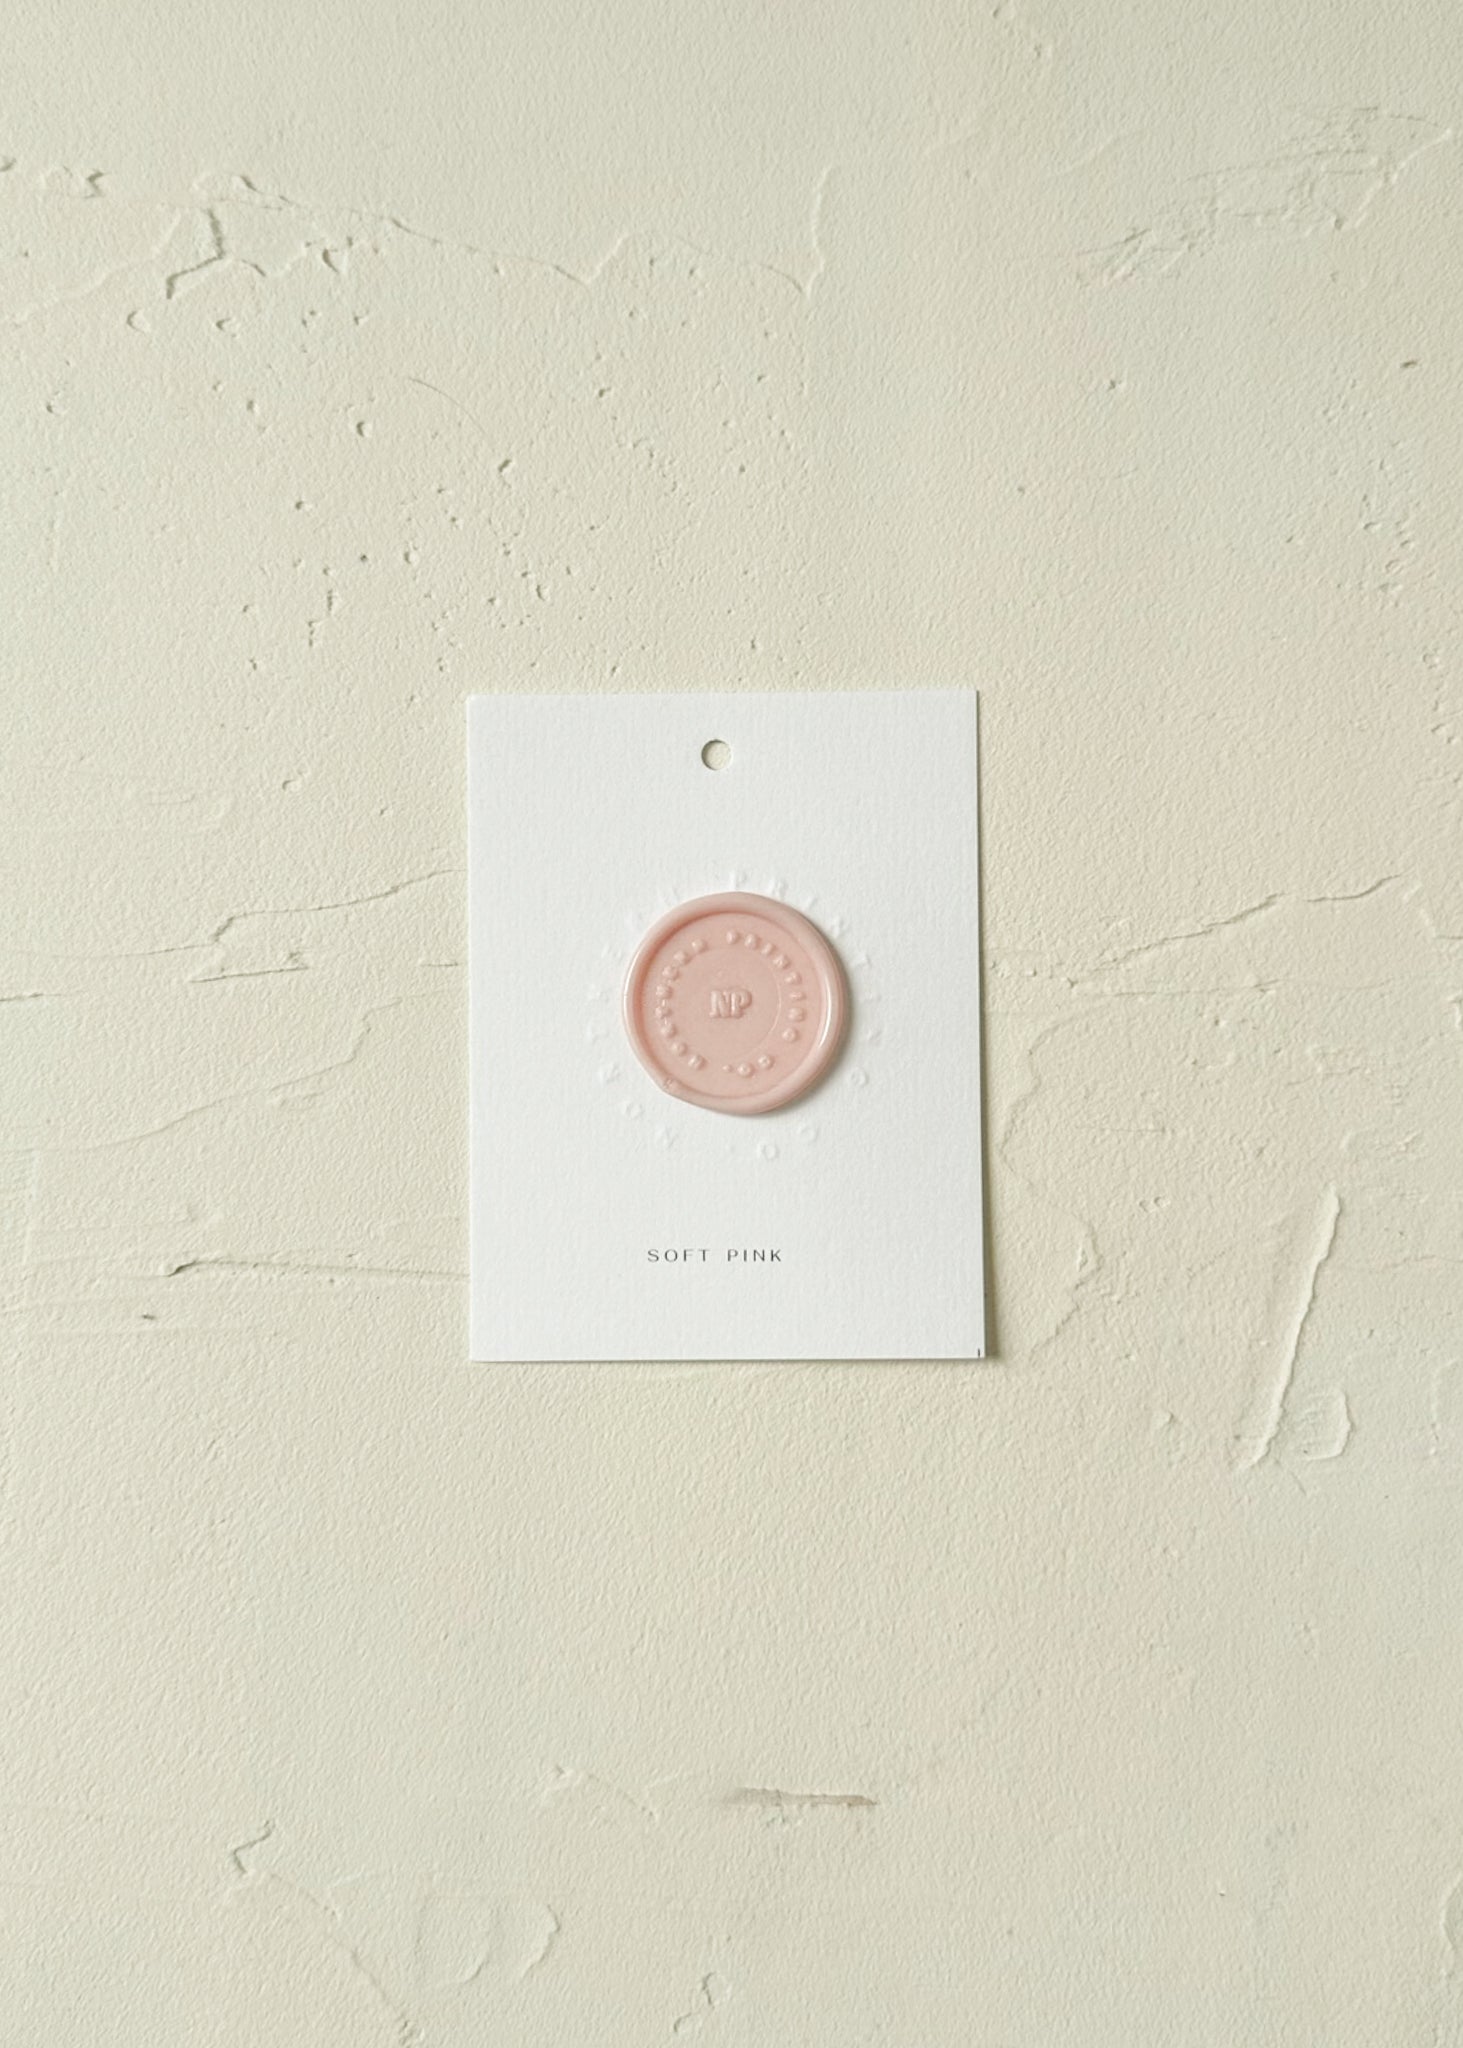 Elevated view of Soft Pink wax seal stamp sample on textured background